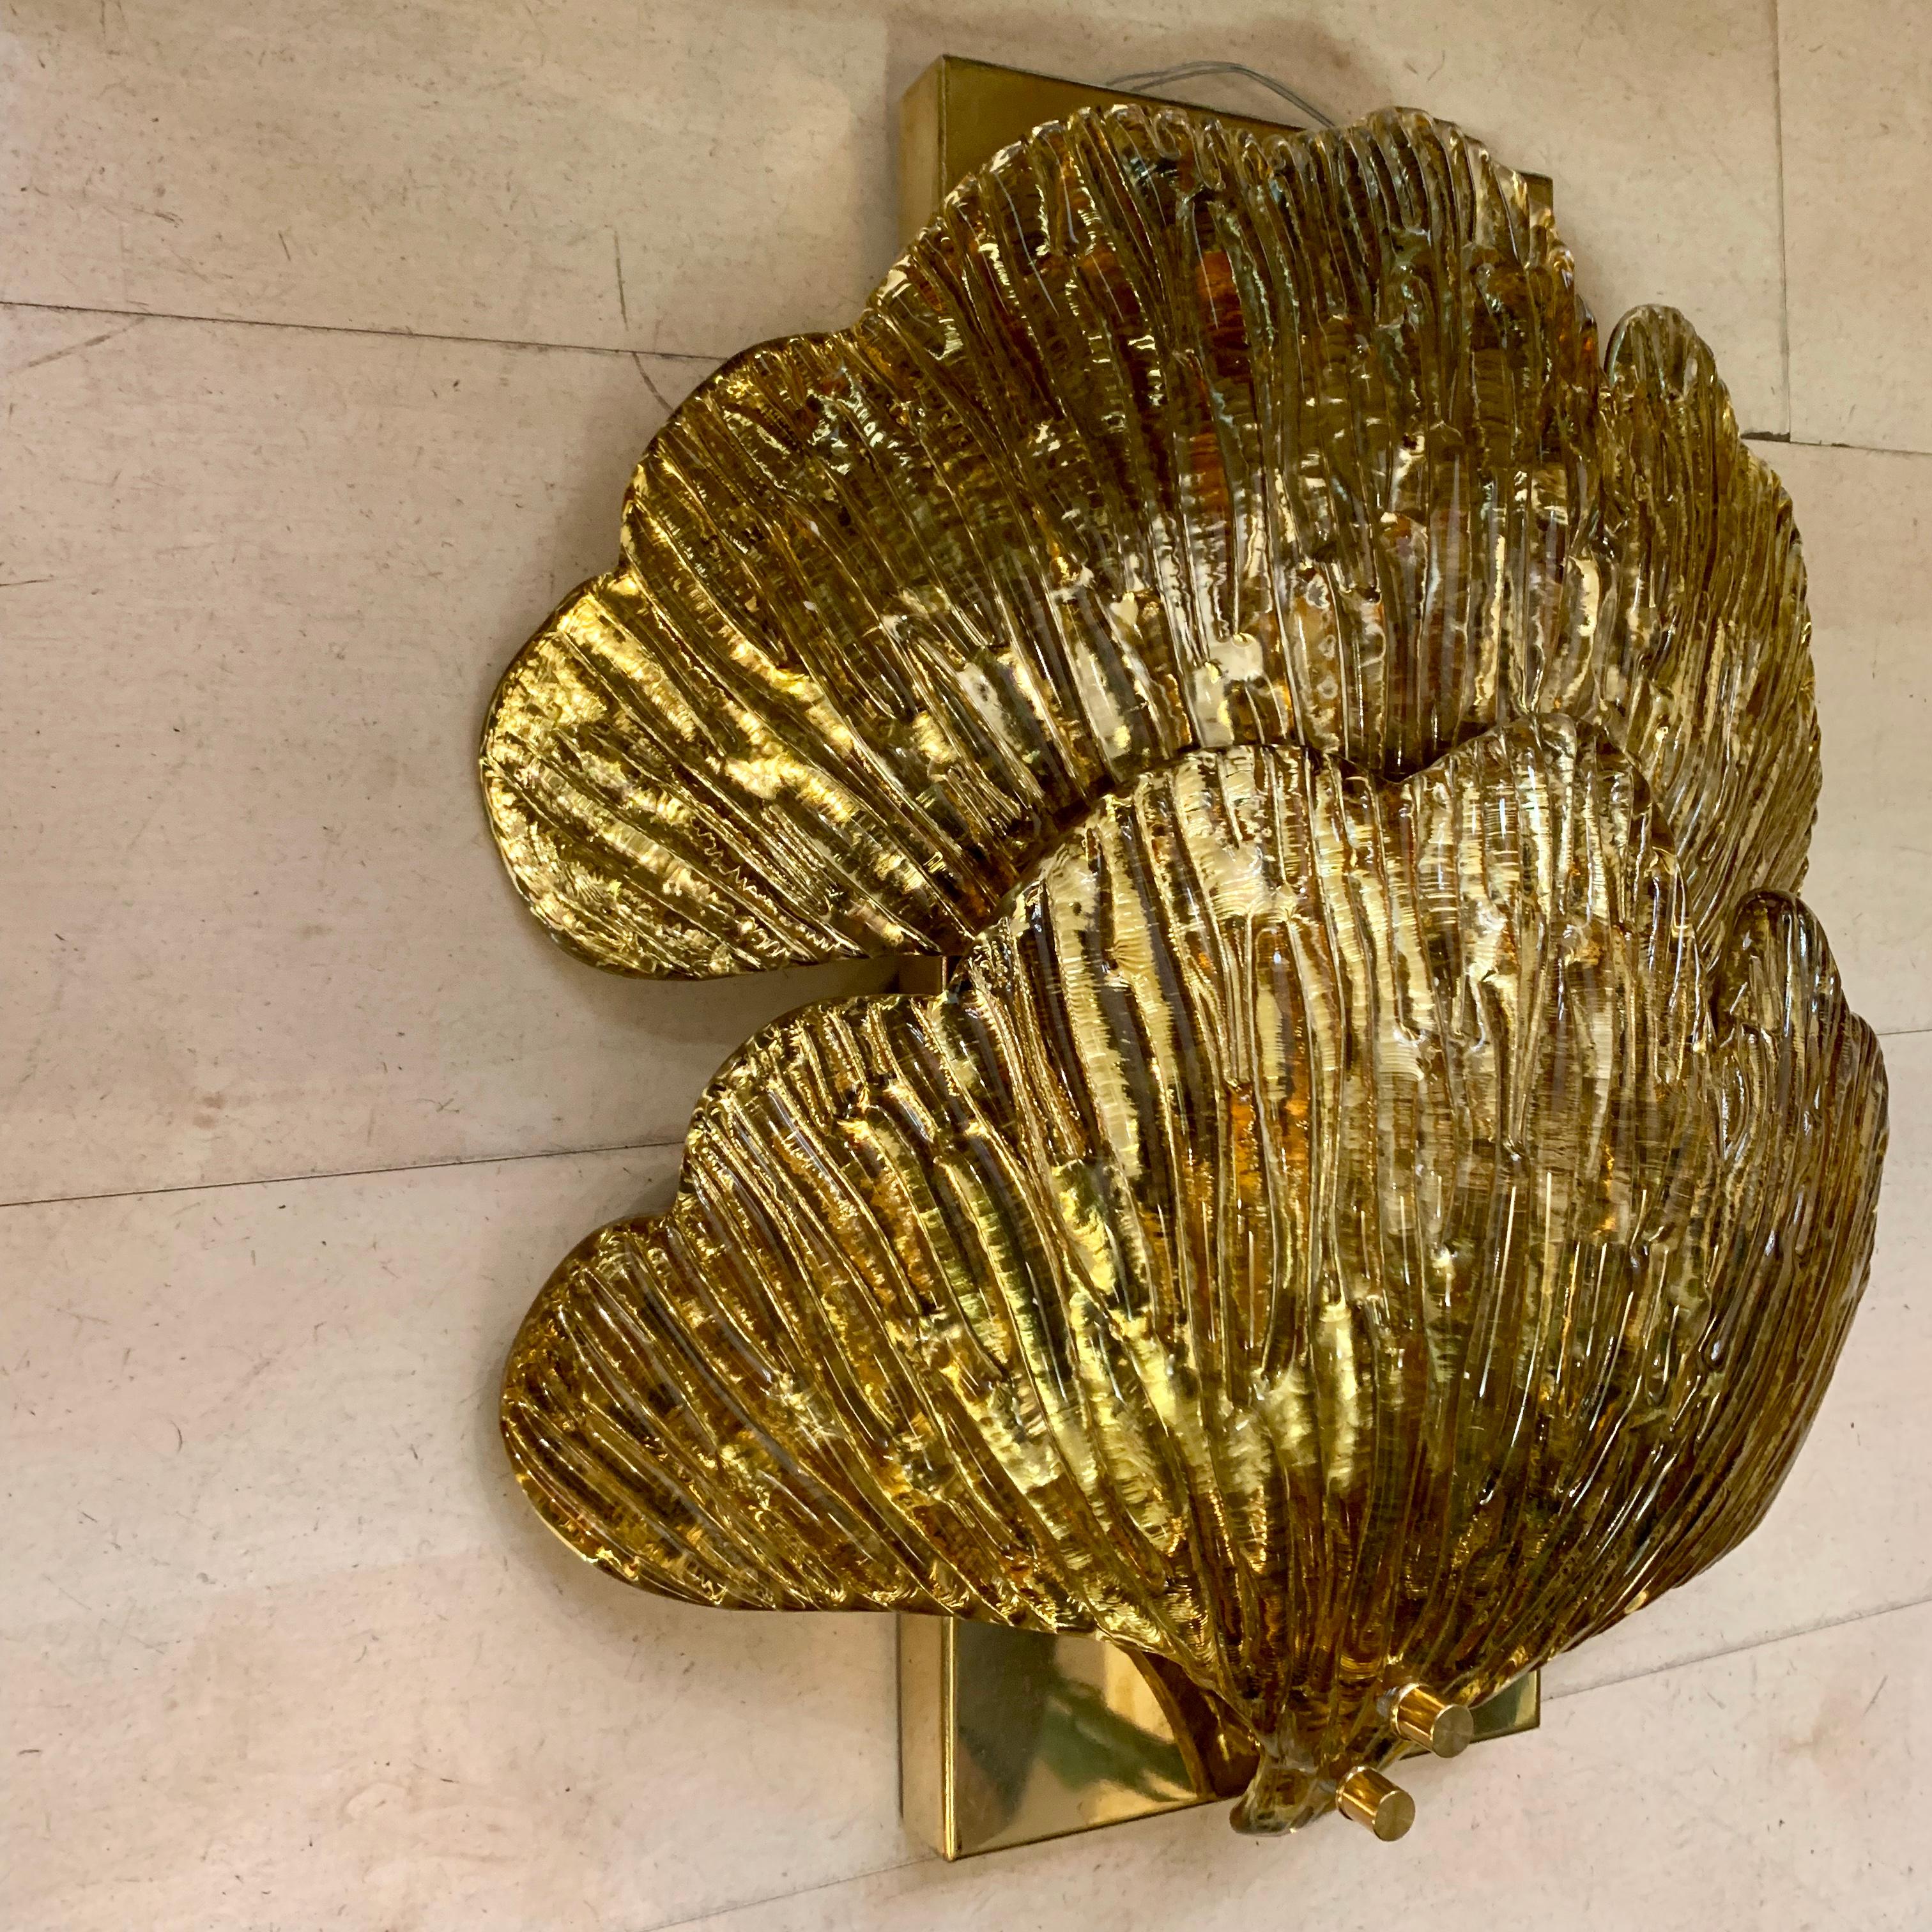 Pair of golden Murano glass mirrored ginkgo leaf sconces.
Each applique is composed of two gilded ginkgo leaves in mirrored hand blown Murano glass.
The structure is in brass and there are 4 bulbs per sconces.